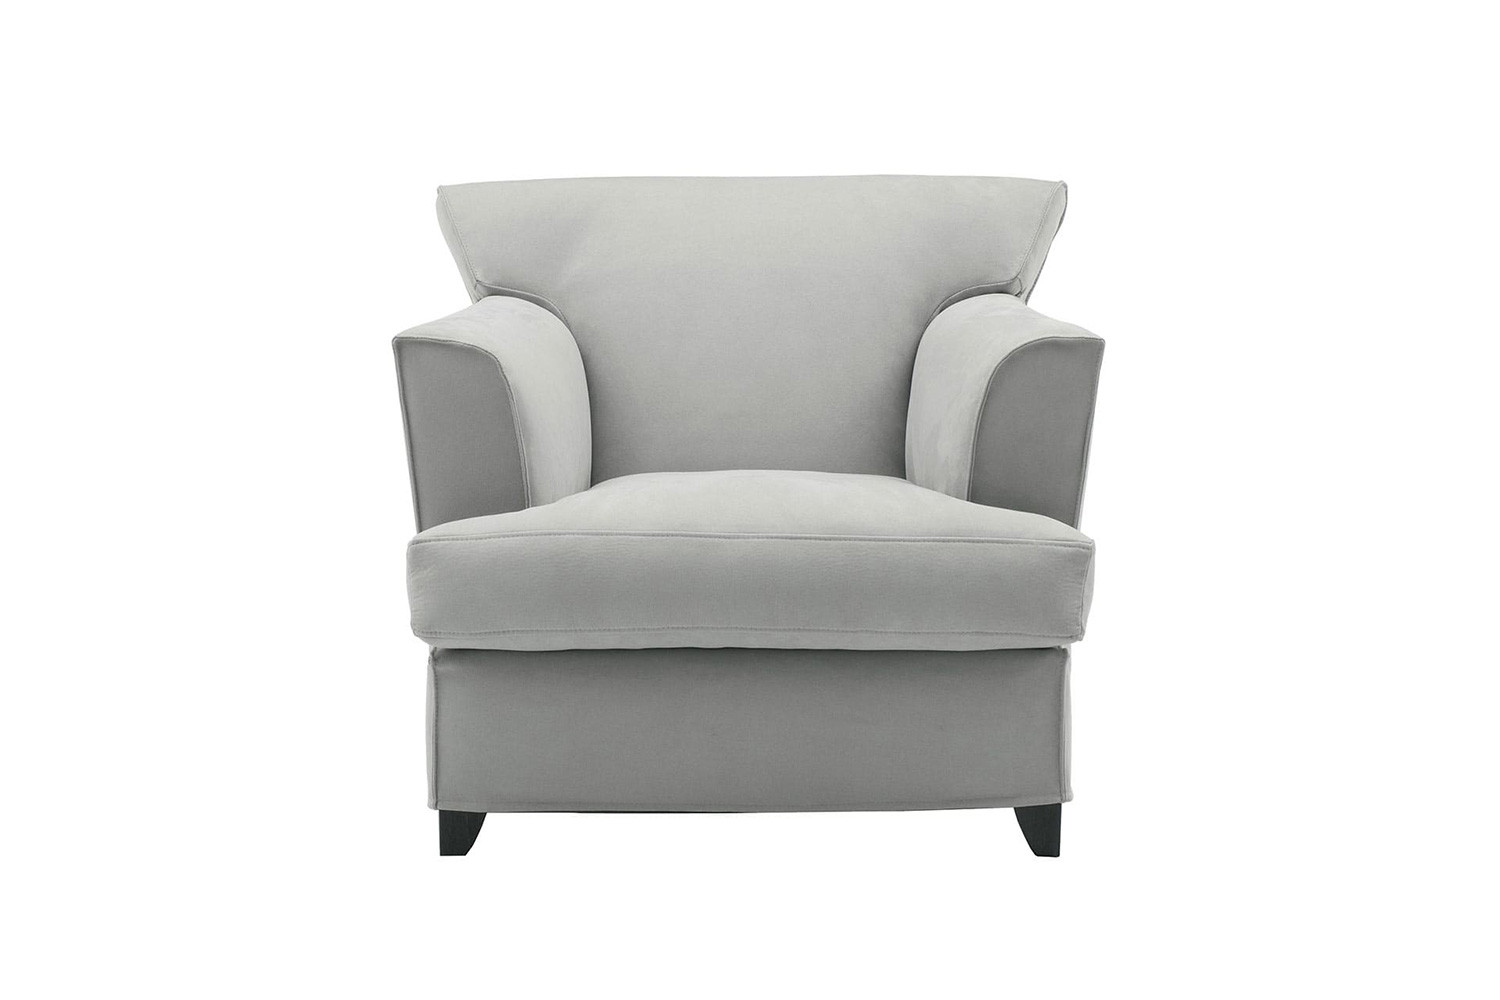 Thick padded comfortable armchair with a deep t-seat cushion, recessed high arms and wooden legs